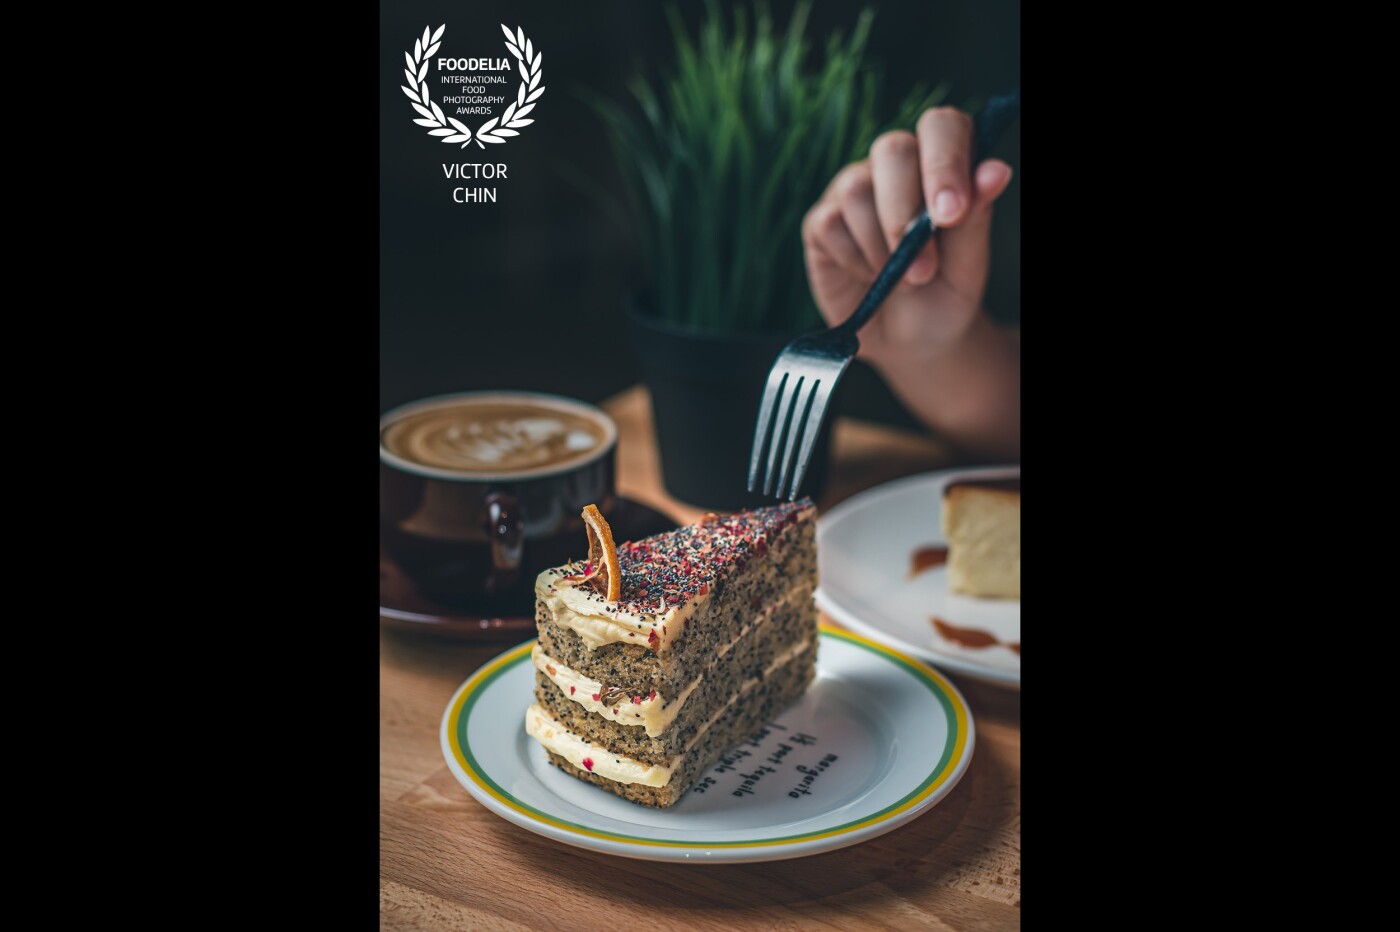 Vegetarian Tiramisu. The picture was taken during a food review project to be published on Facebook. The cake taste just nice, creamy enough to melt in your mouth. 